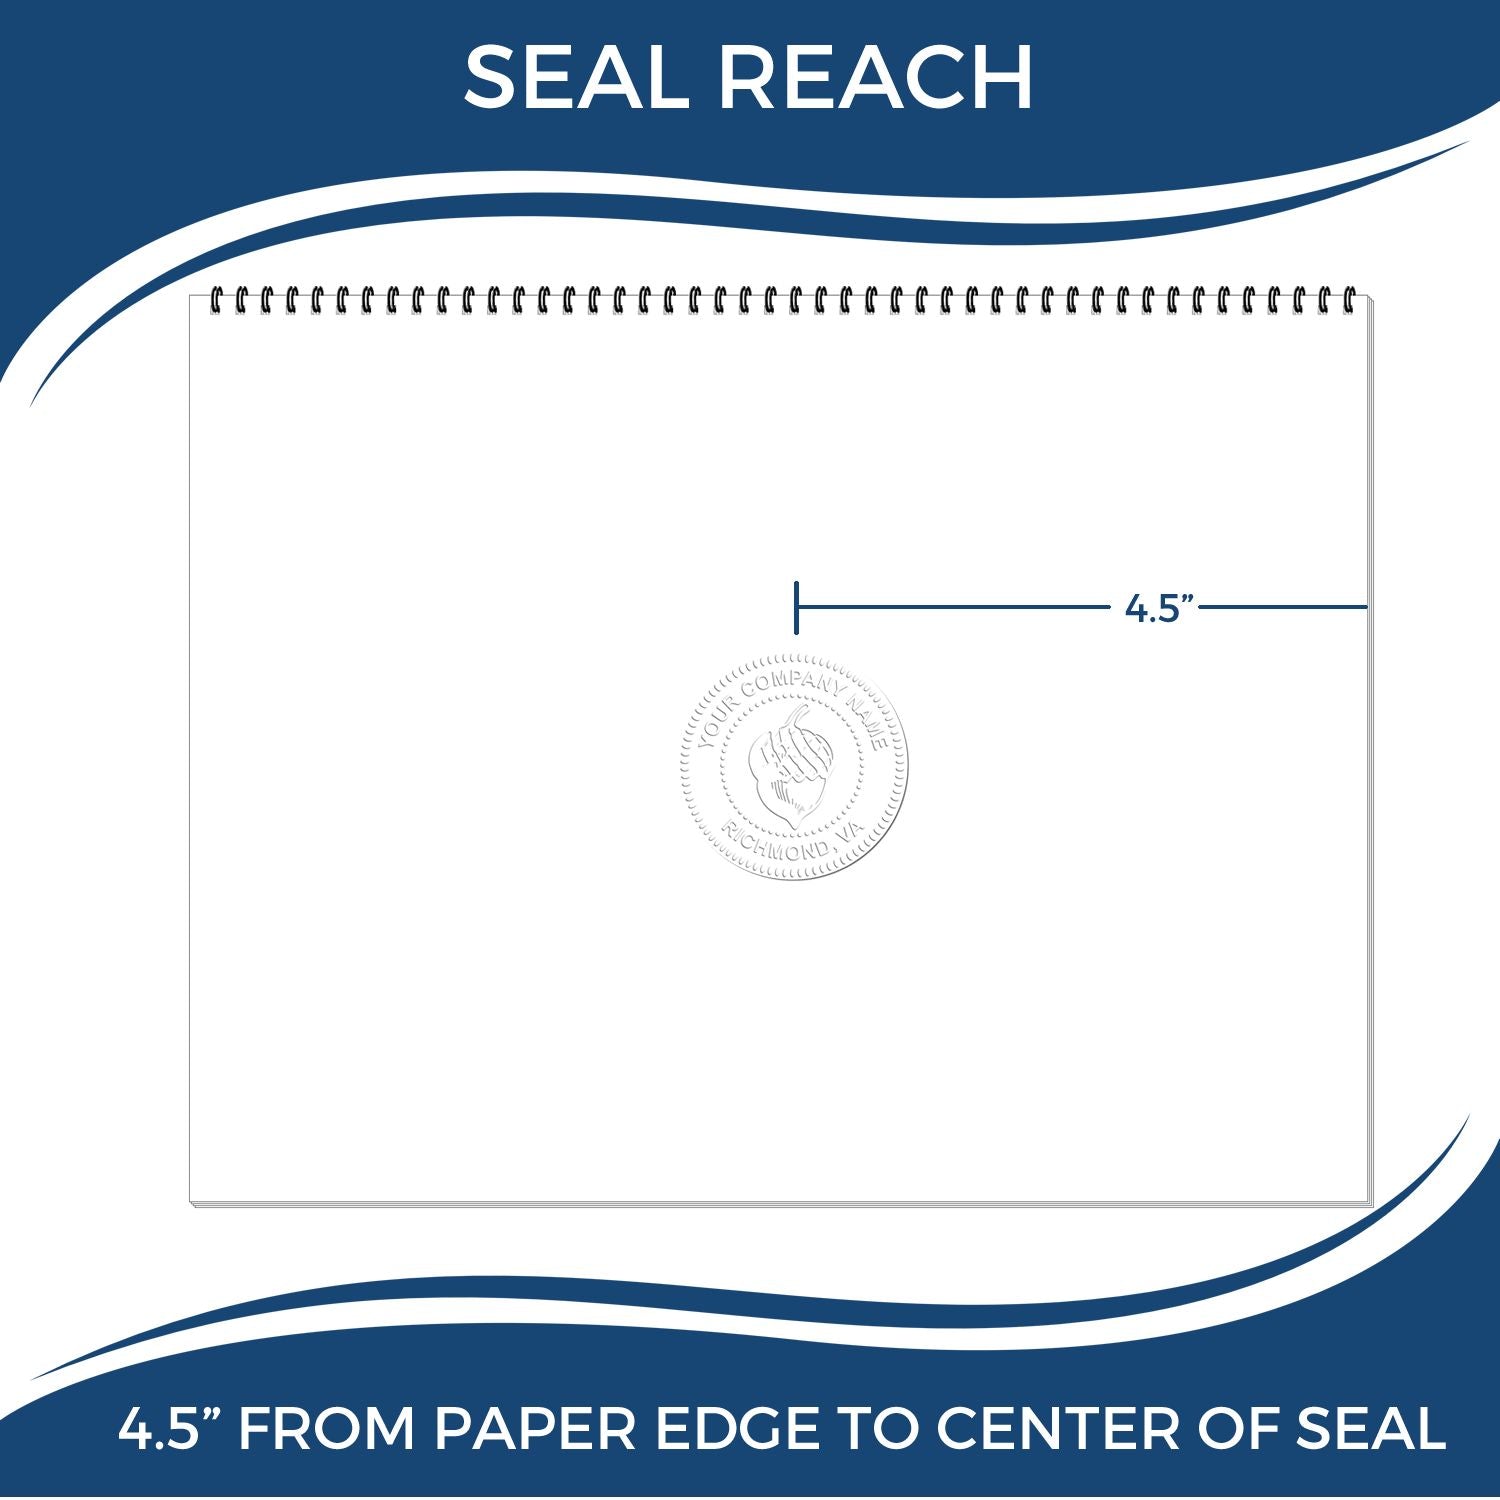 An infographic showing the seal reach which is represented by a ruler and a miniature seal image of the State of Iowa Extended Long Reach Geologist Seal